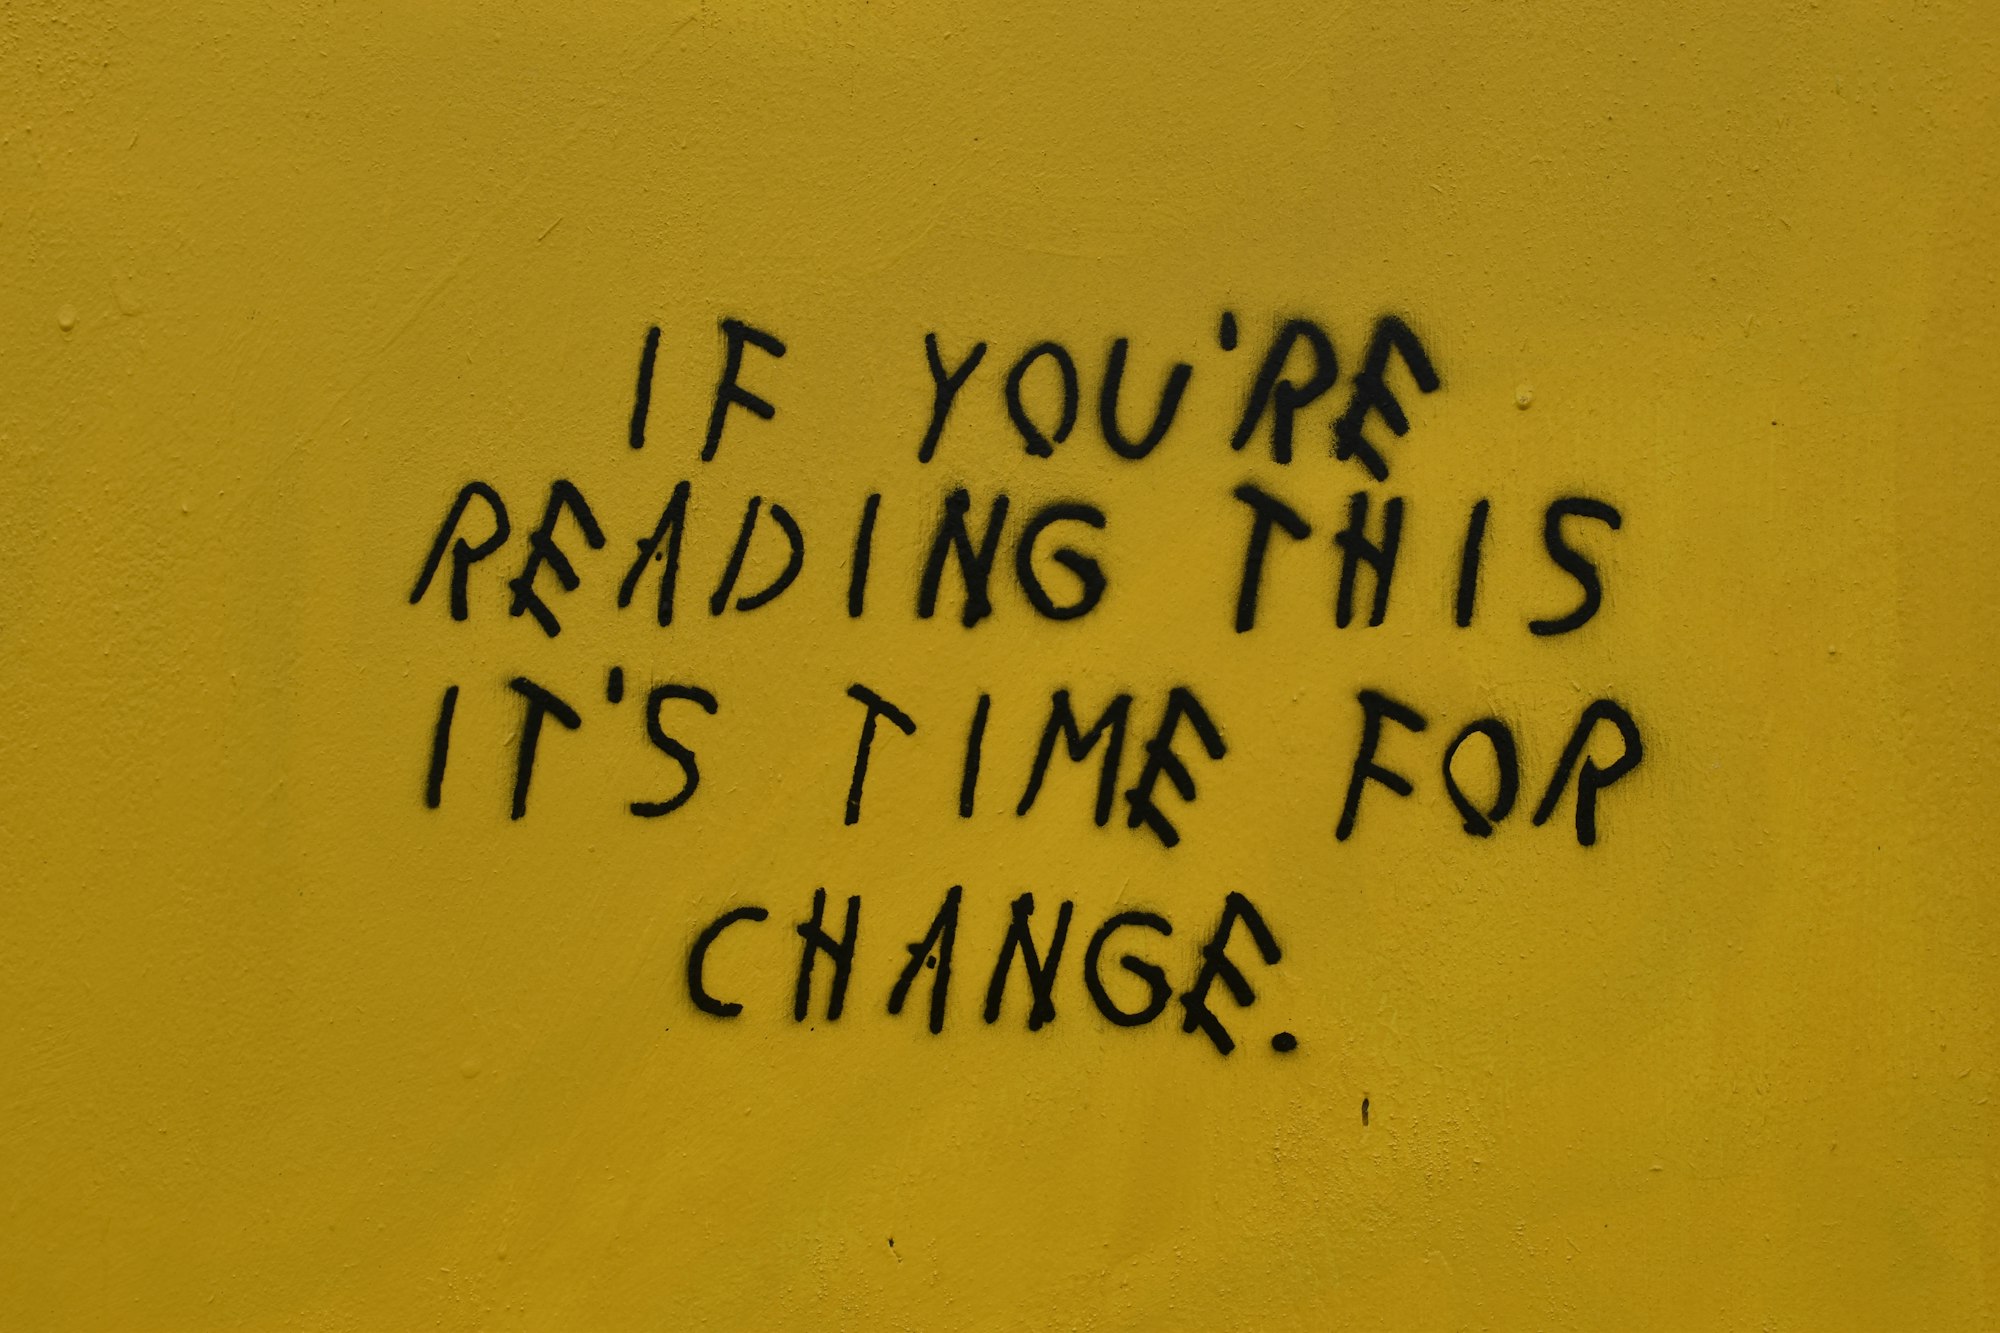 the words "if you're reading this it's time for change." scrawled in black on a wall